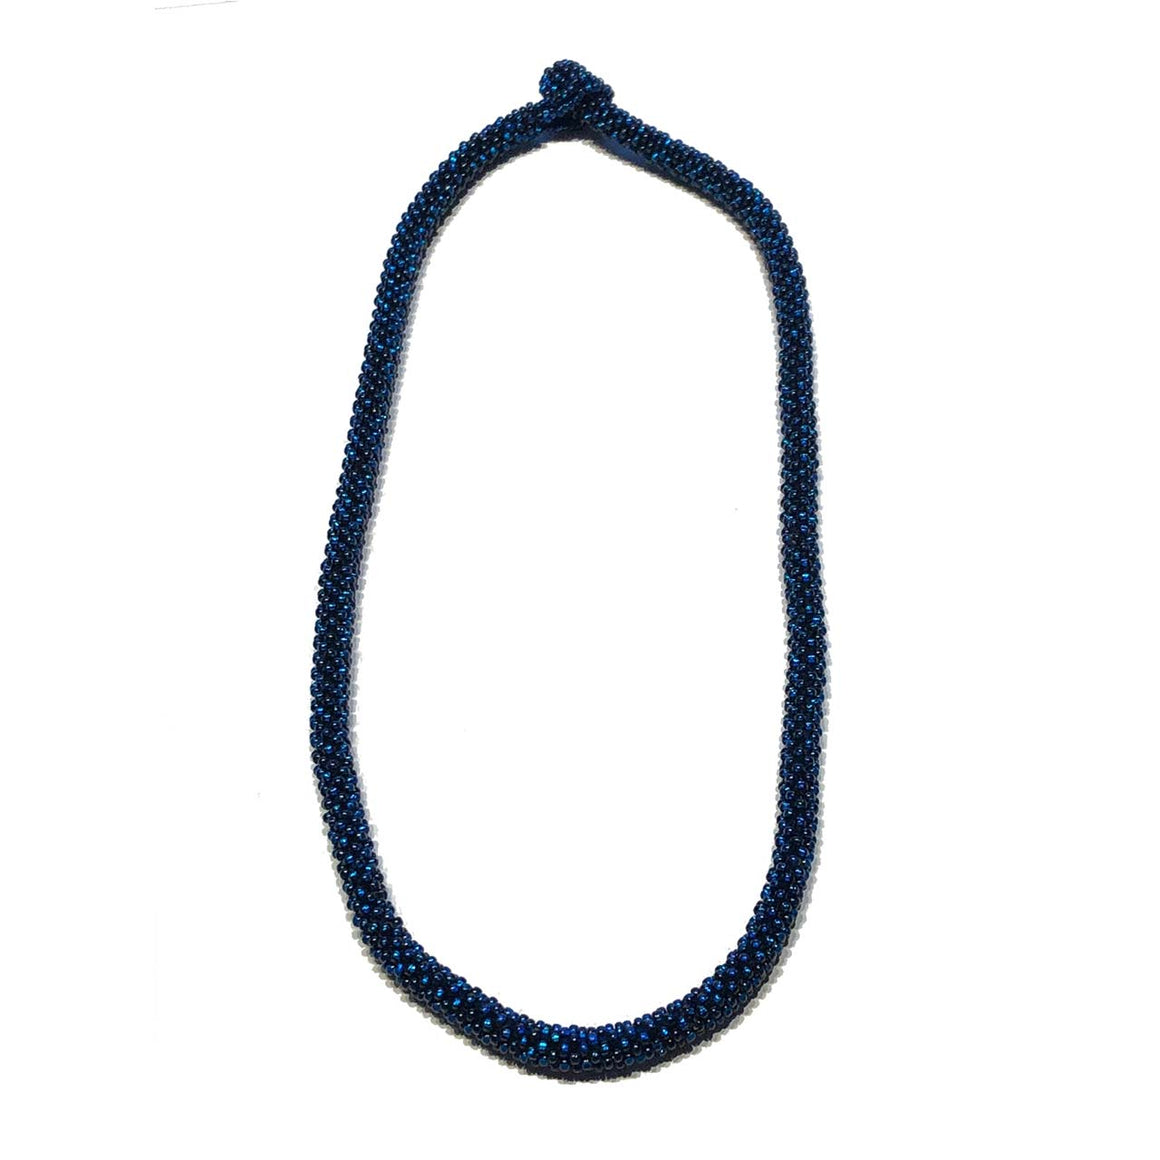 Hand Crocheted Sapphire Coloured Glass Bead Necklace 19.5 inches or 24 inch Length